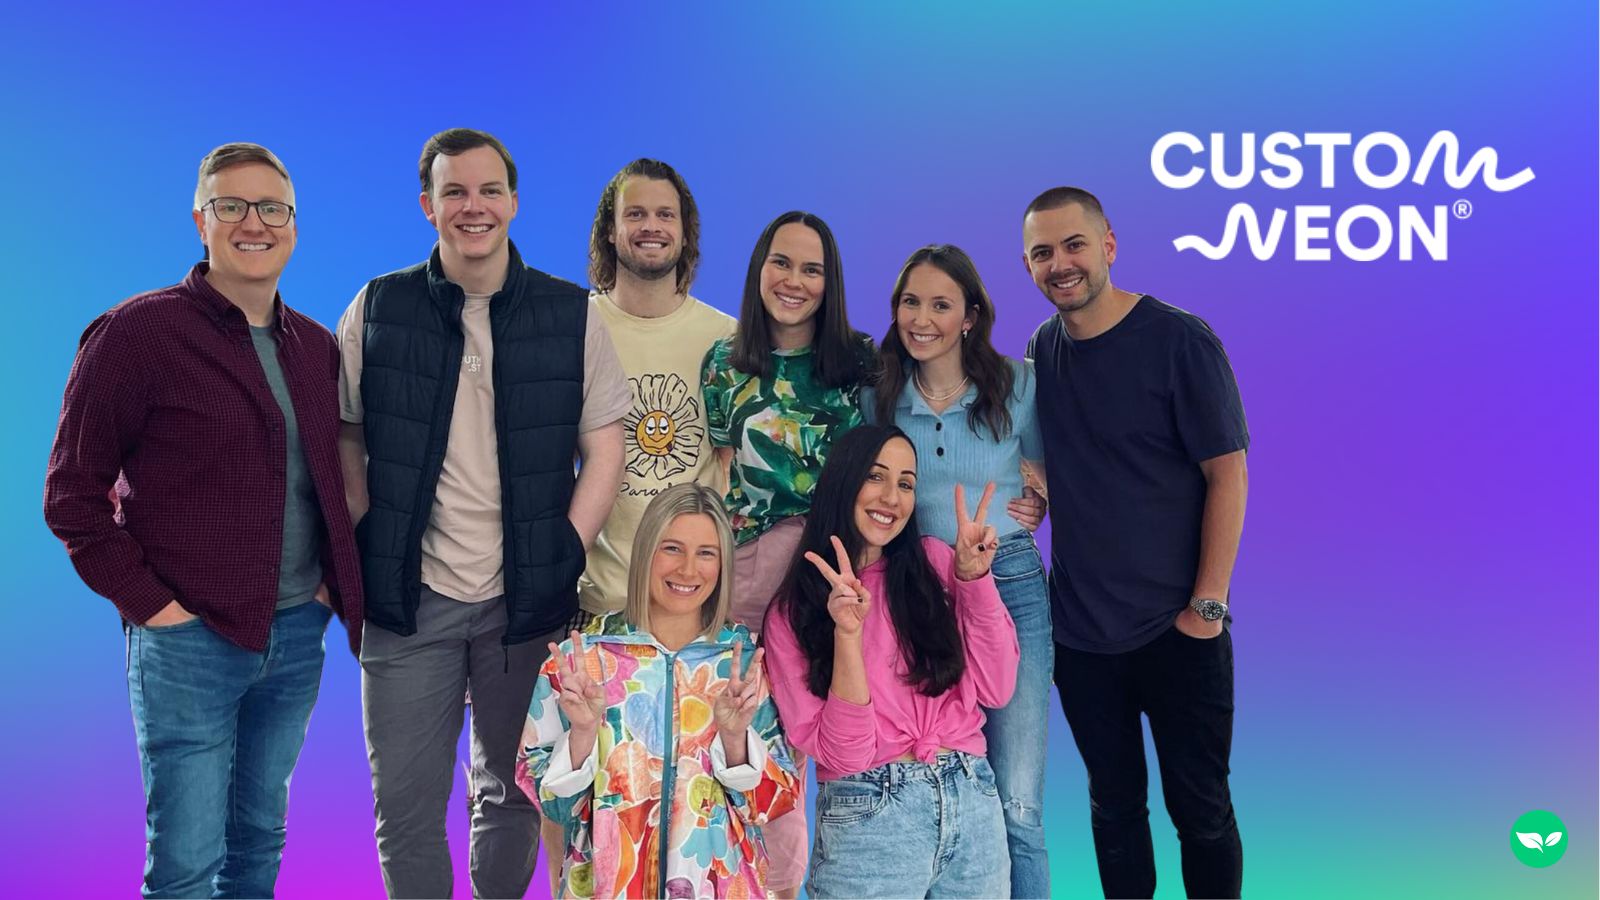 Jess and Jake standing with part of the Custom Neon team